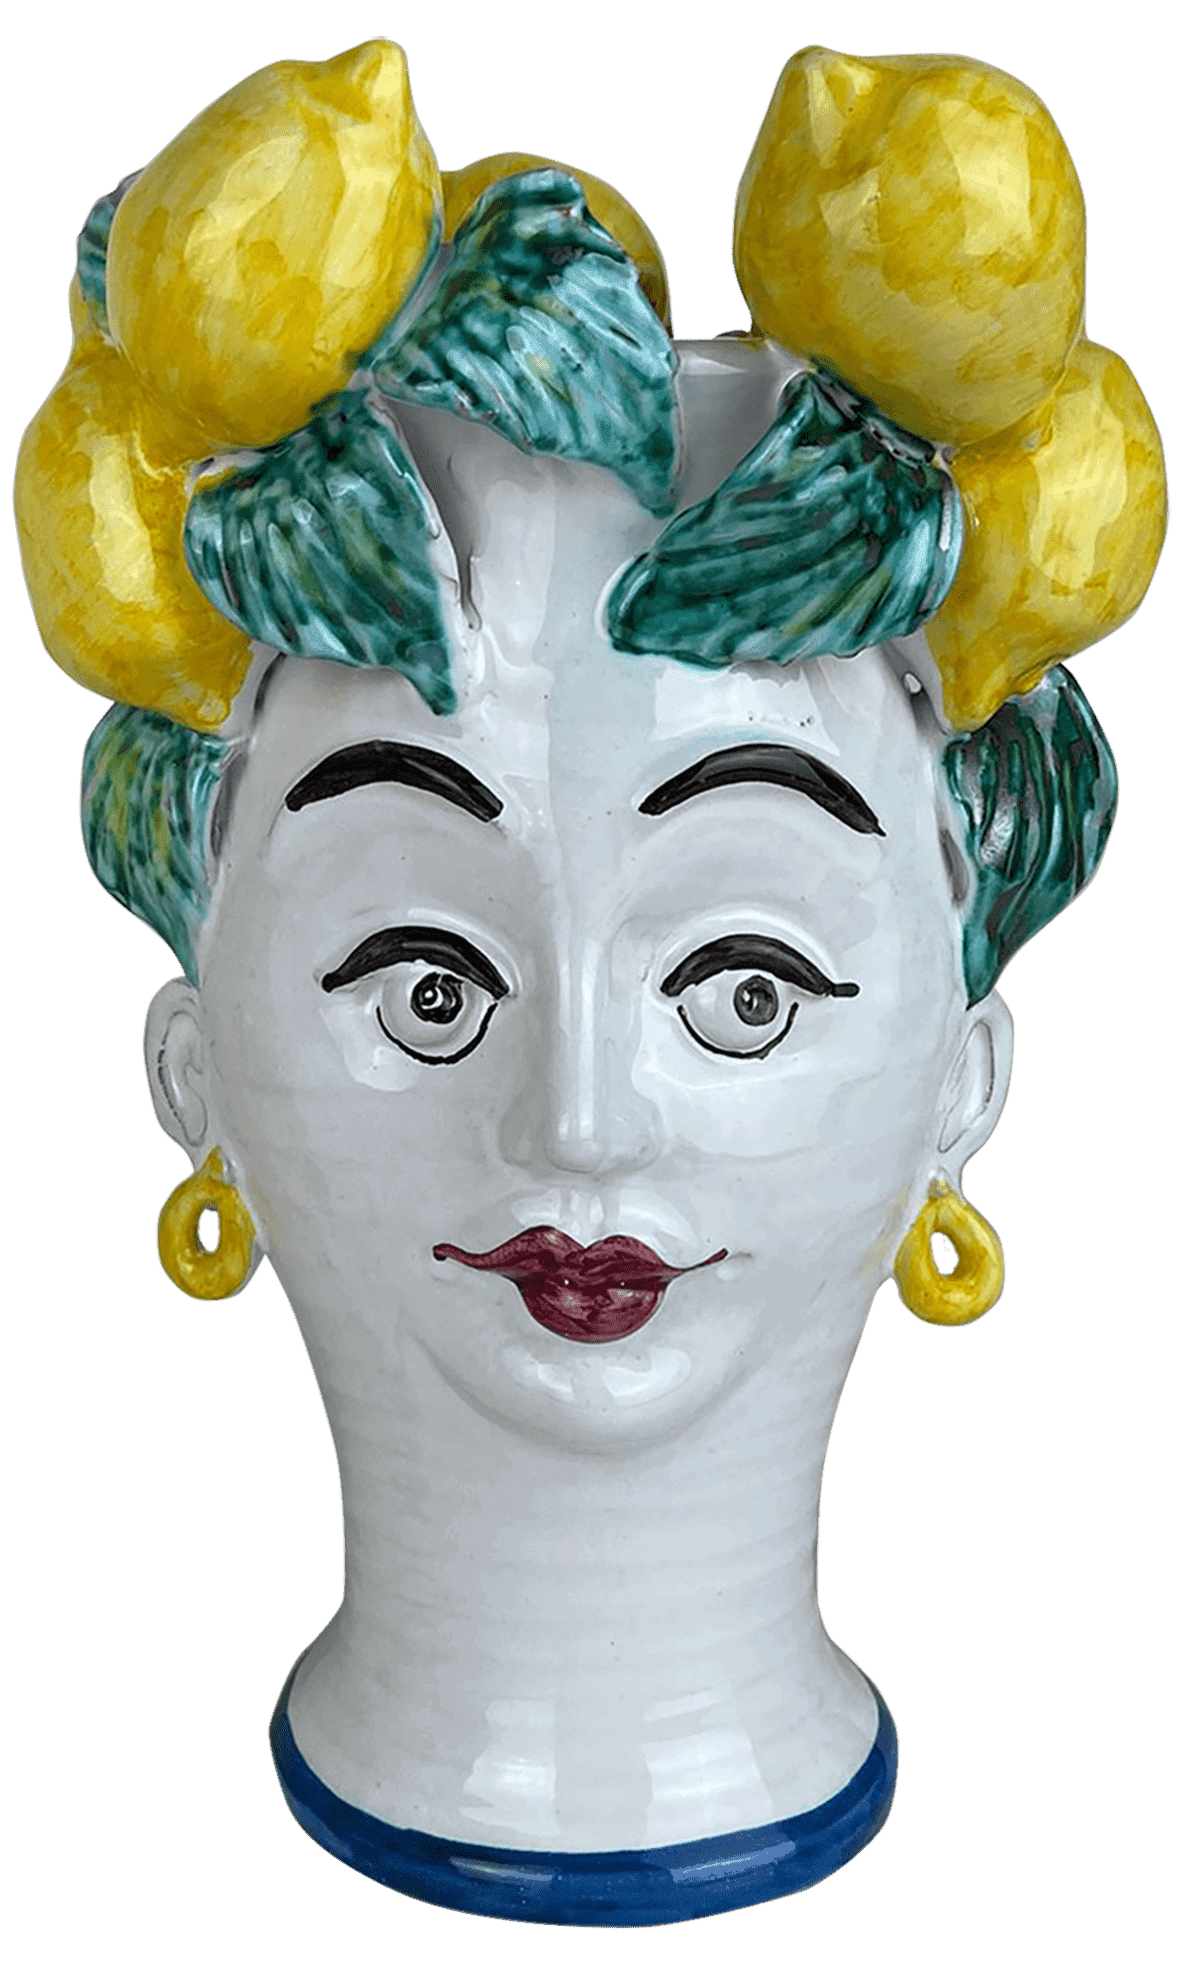 A ceramic Sicilian style vase of a ladies head decorated with lemons. The vase/ centrepiece is hand painted and  features yellow lemons, green leaves, red lips, yellow earrings and black facial features. 